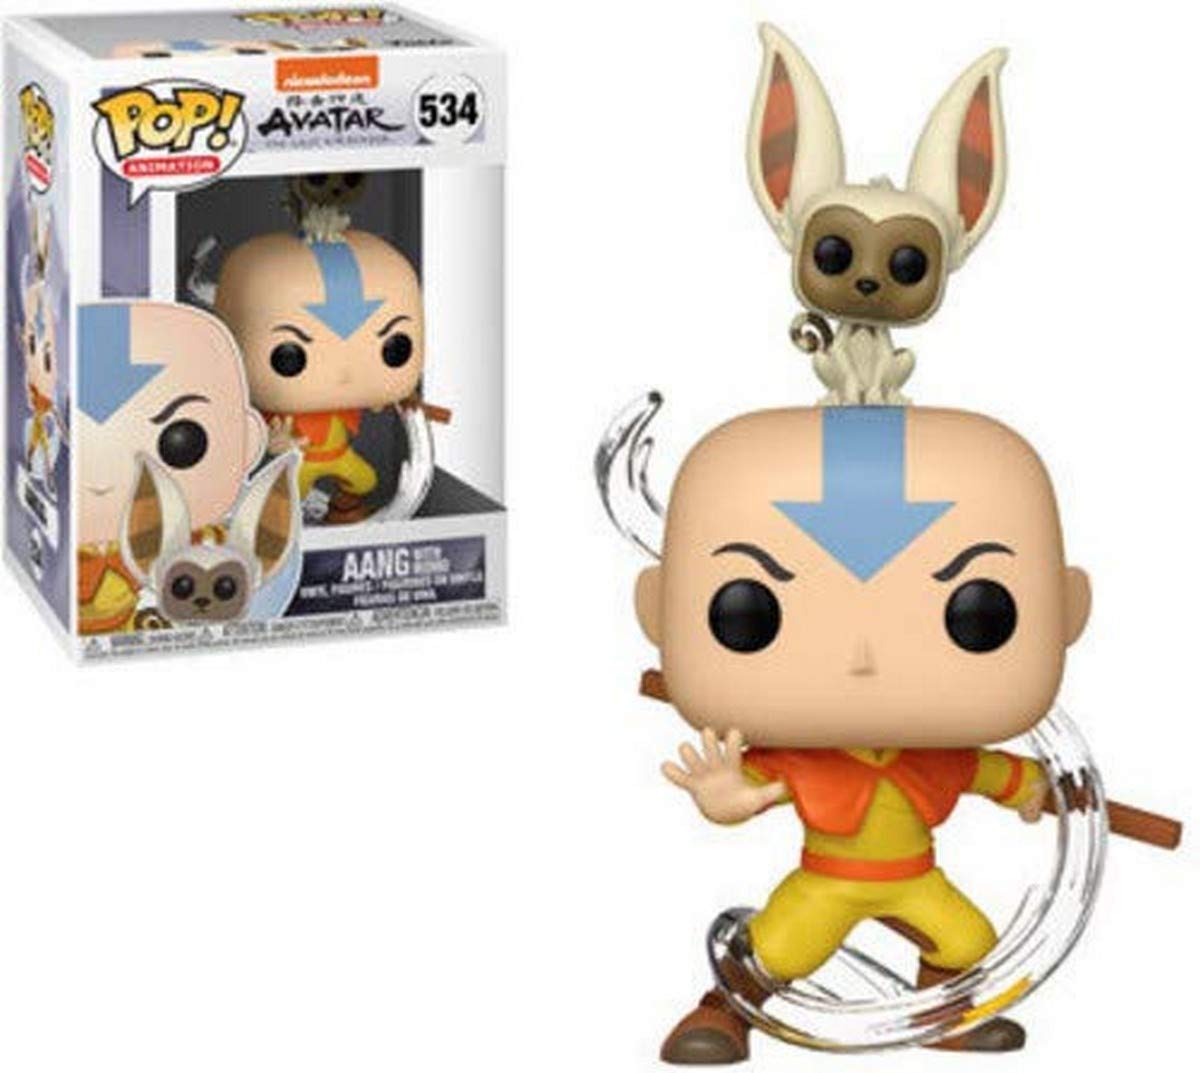 If Avatar The Last Airbender Official Merch Is So Terrible